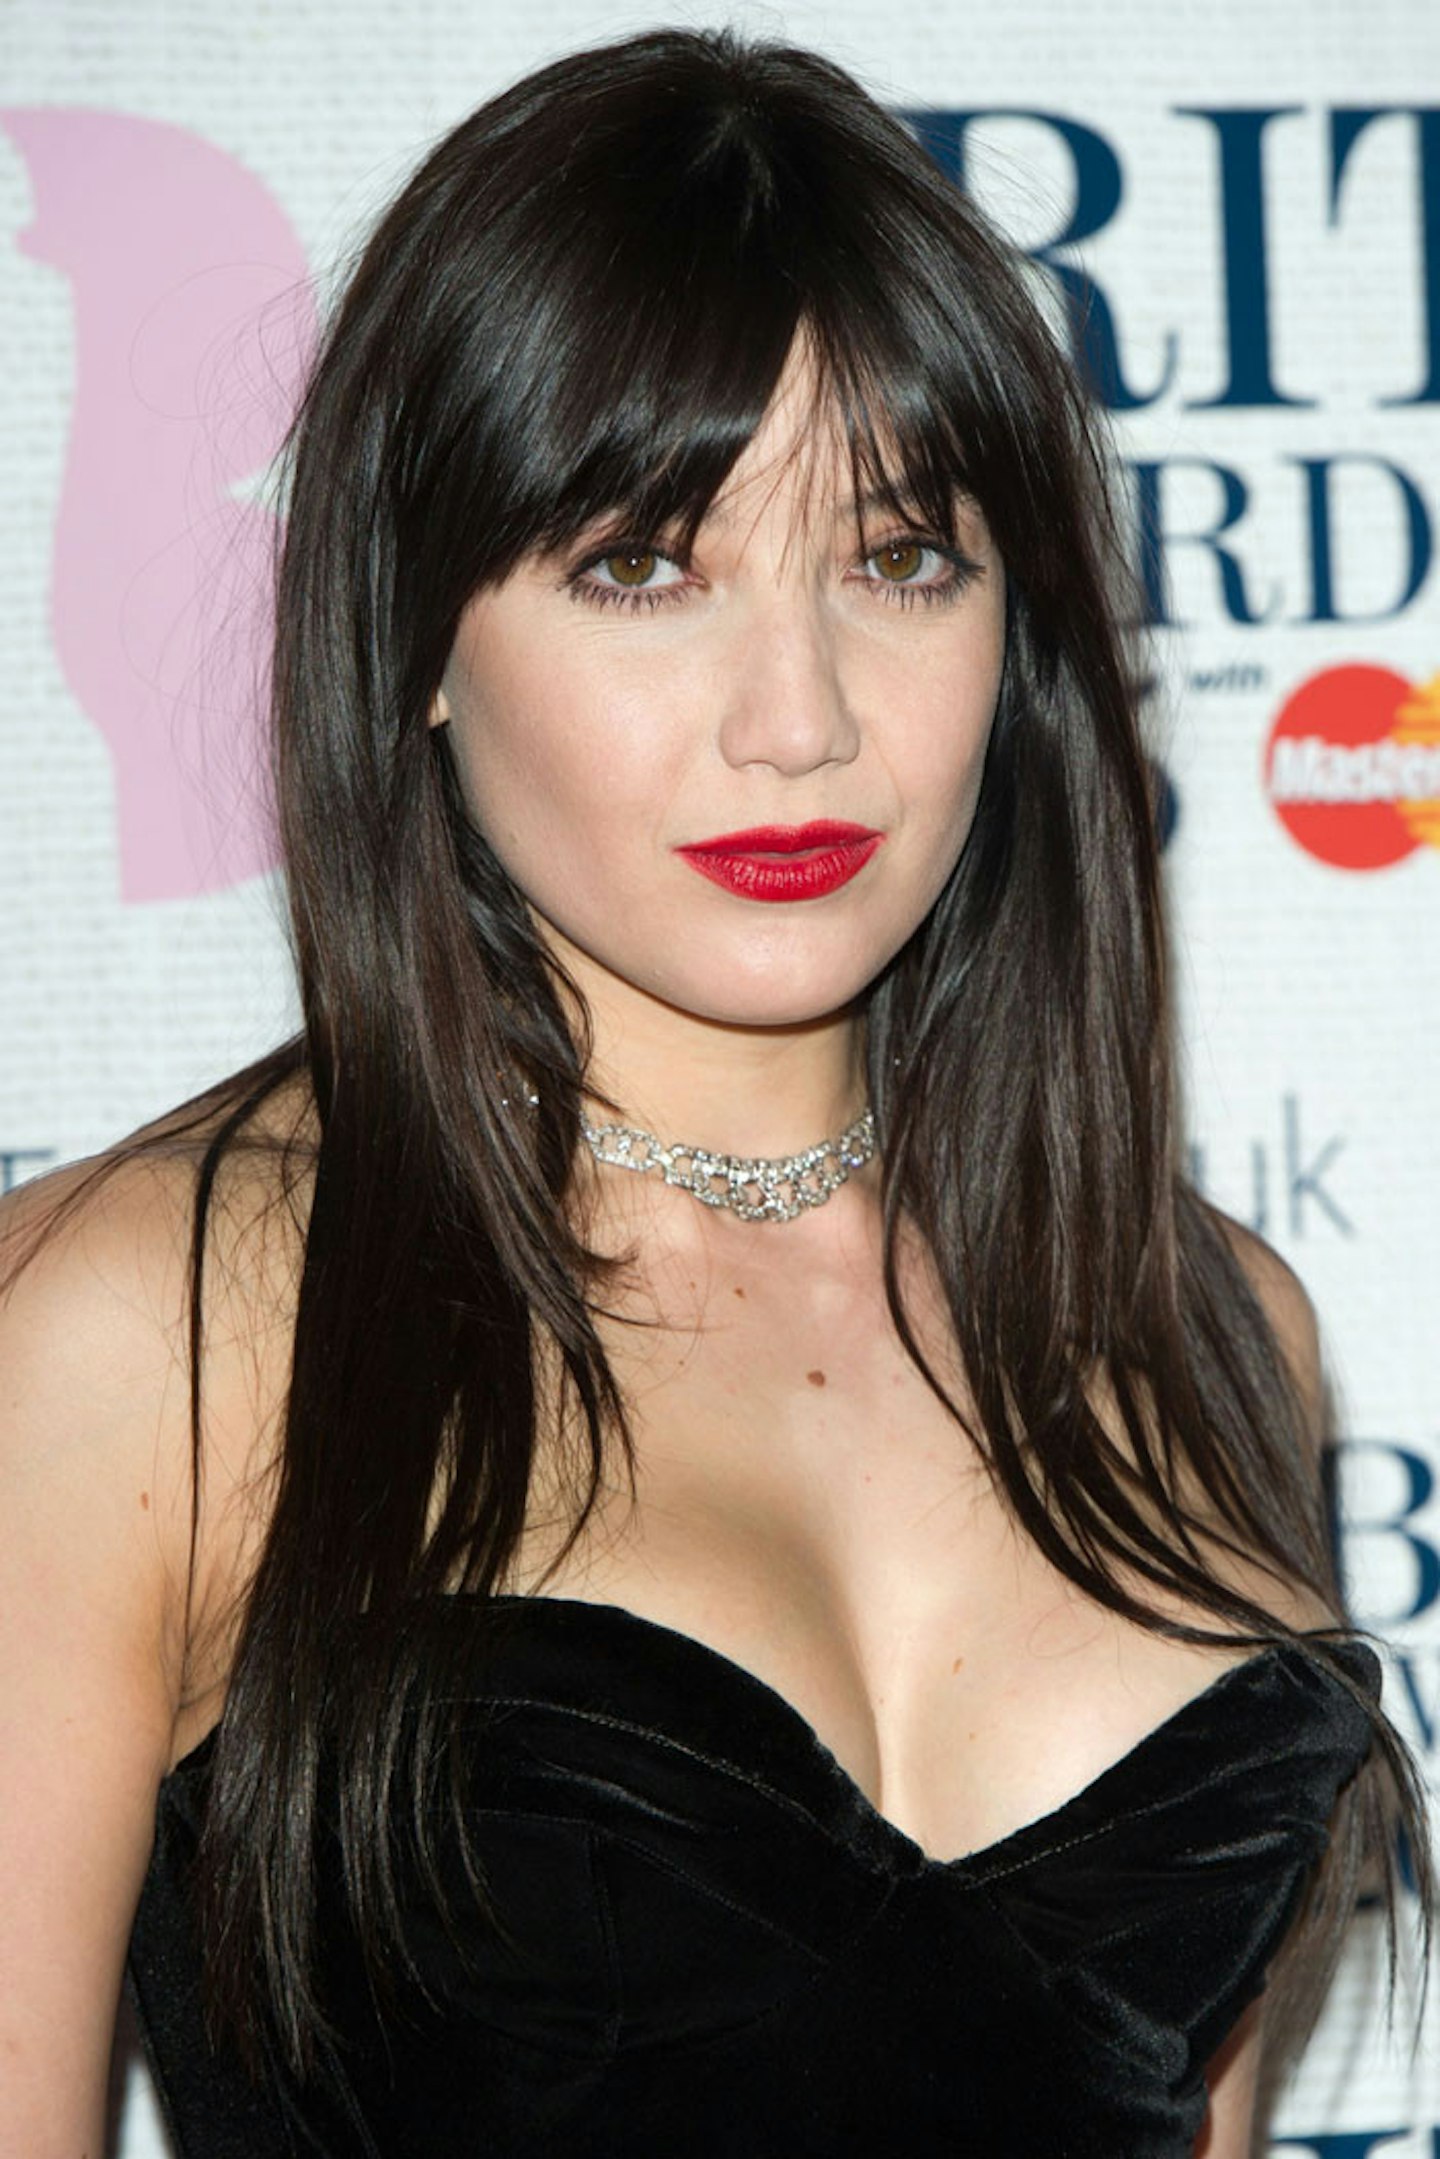 Our Aim: Daisy Lowe is a regular of Arezoo's for facials